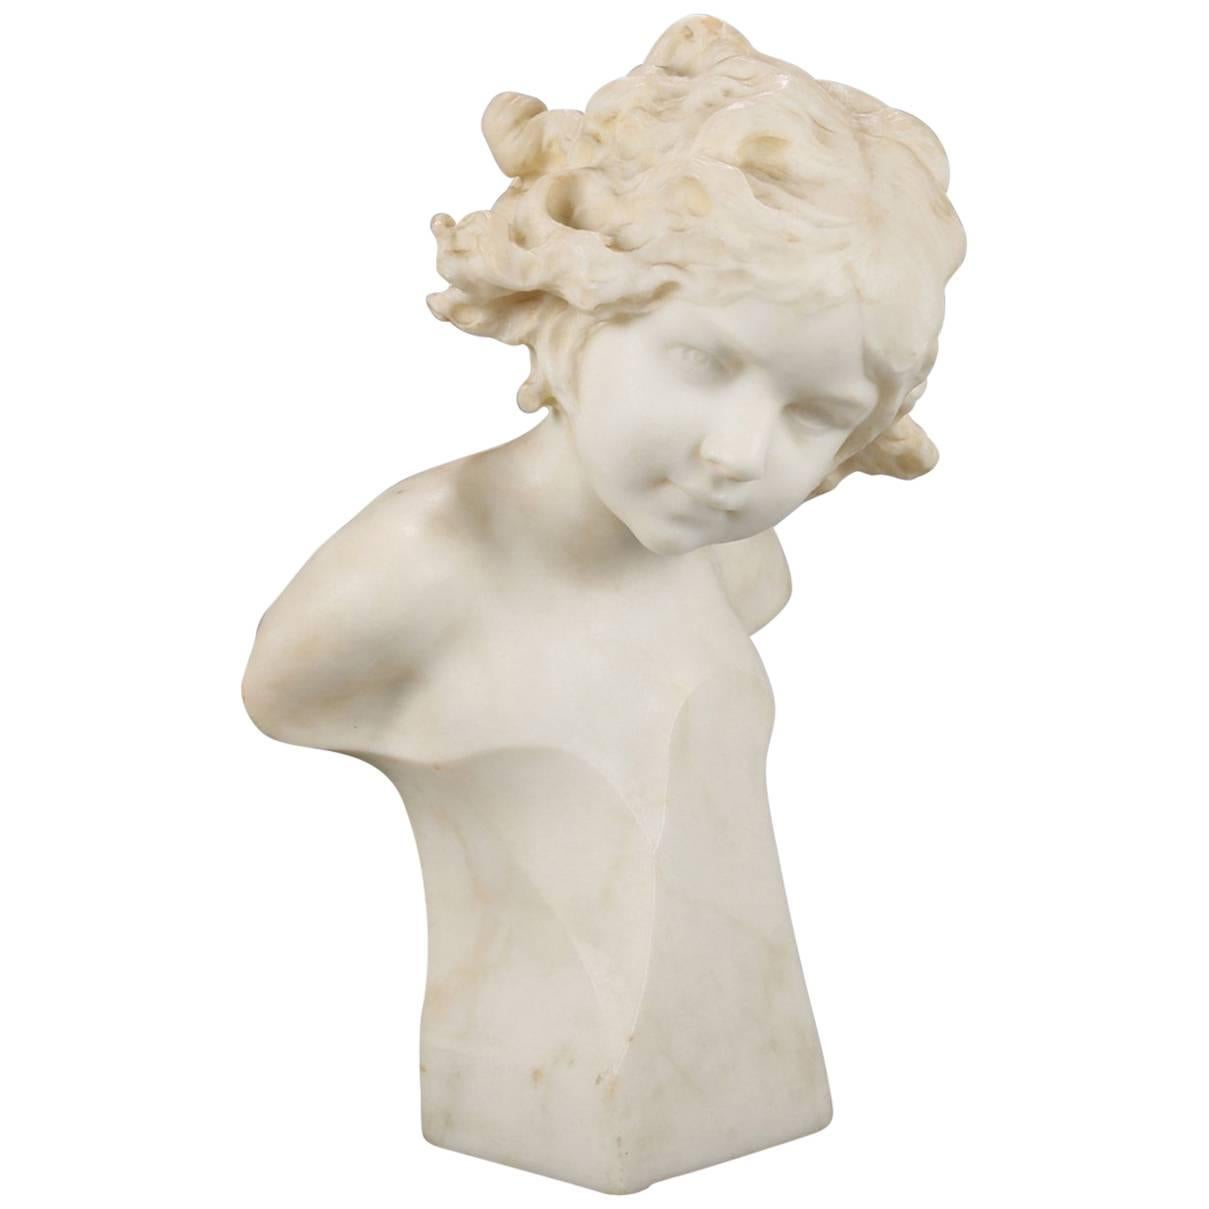 Antique Italian Figural Carved Marble Portrait Bust Sculpture, Young Girl